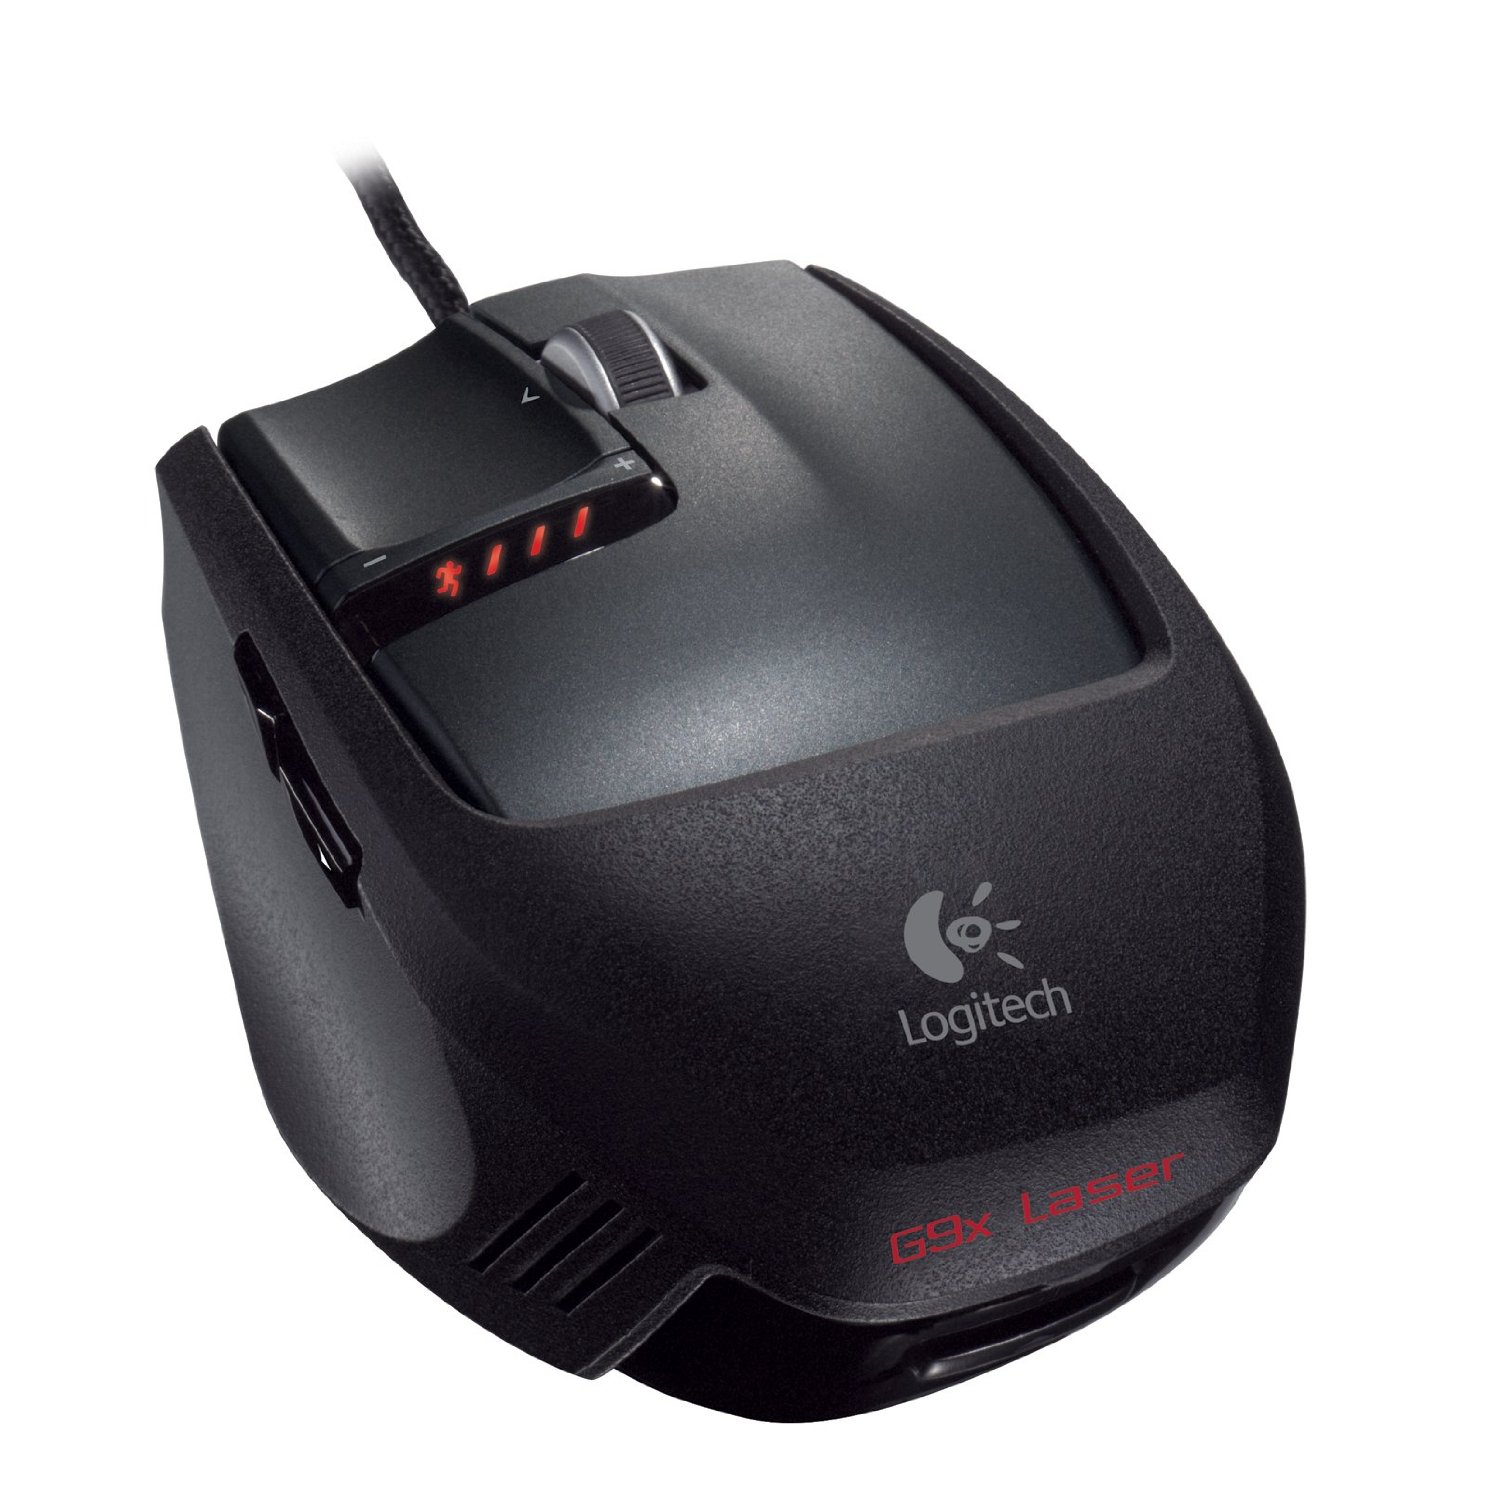 http://thetechjournal.com/wp-content/uploads/images/1111/1321182752-logitech-g9x-programmable-laser-gaming-mouse-1.jpg